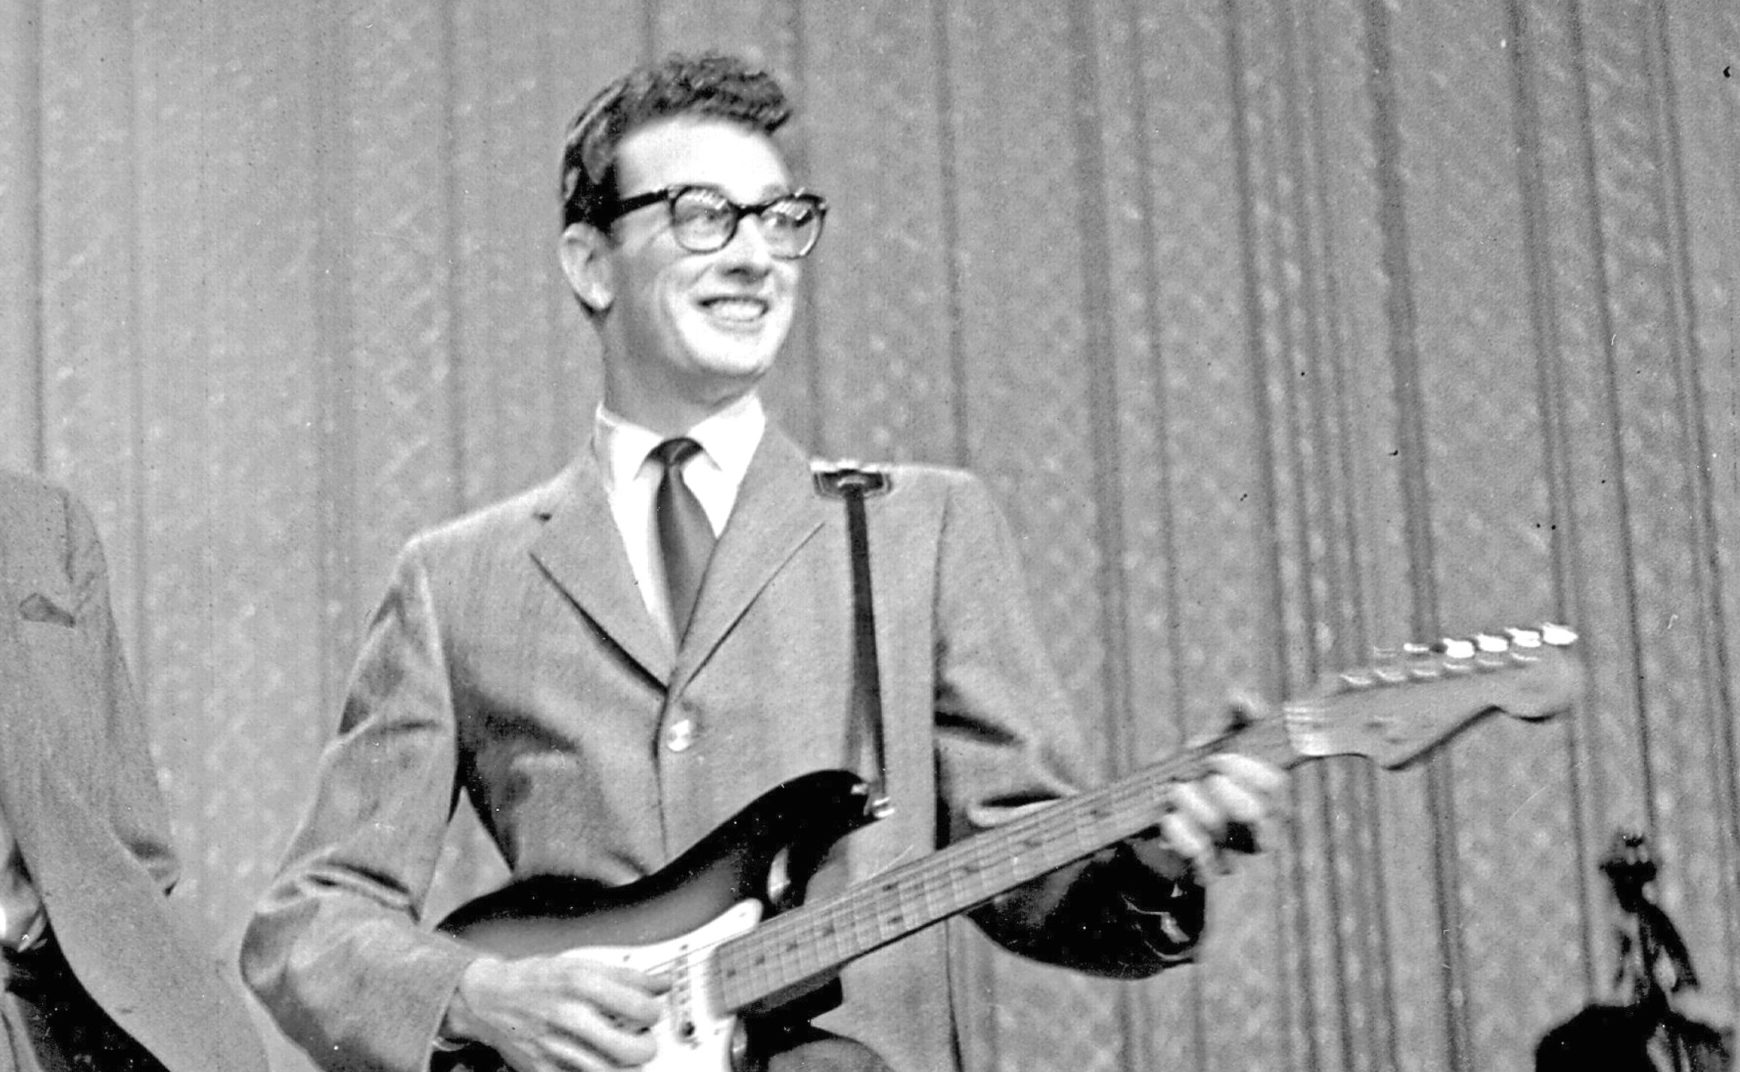 Buddy Holly, 1958 (Steve Oroz/Michael Ochs Archives/Getty Images)